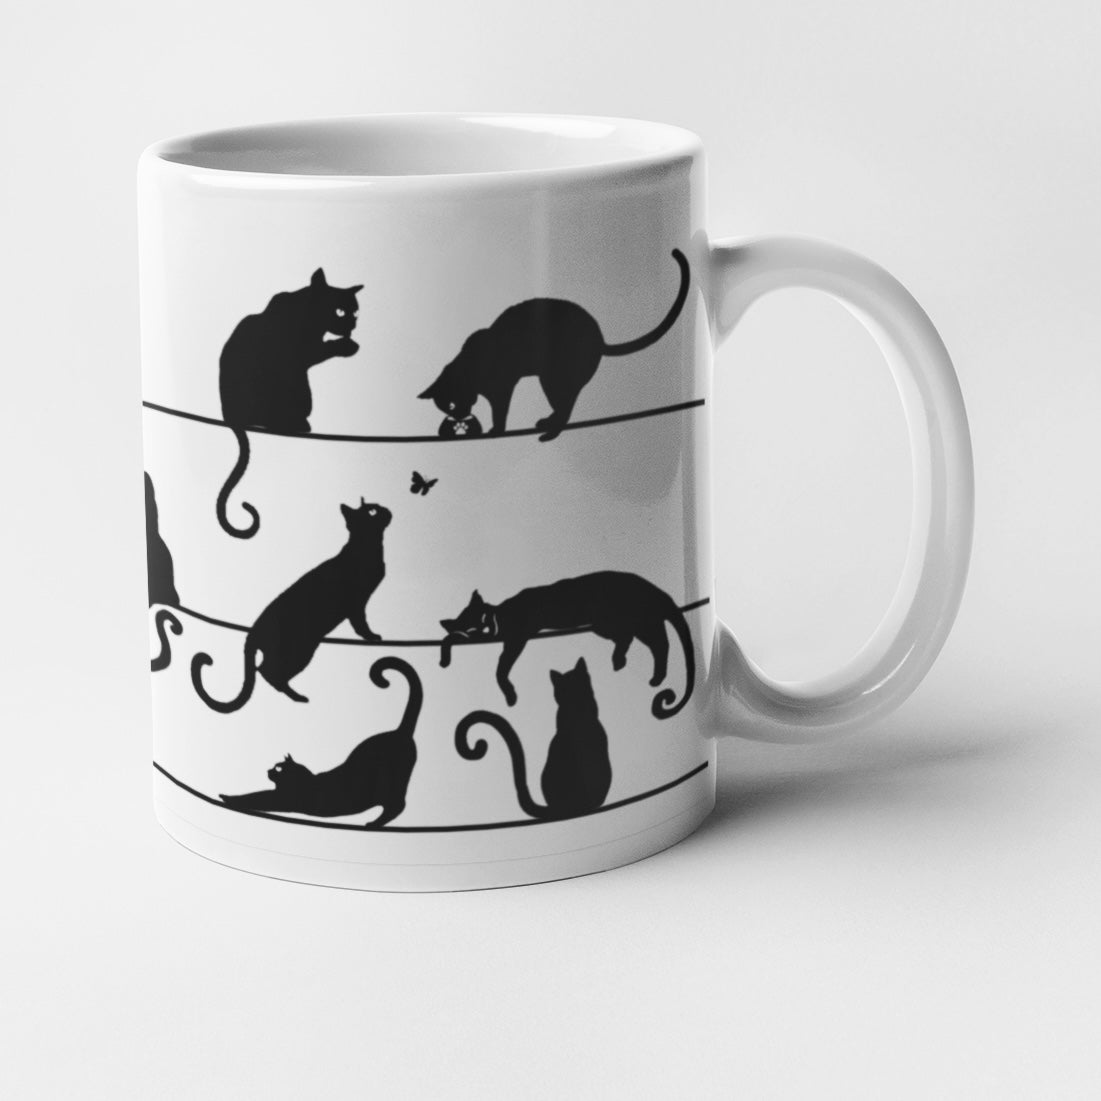 Playful Cats Silhouette Collection Art Personalised Ceramic Mug Gift Idea